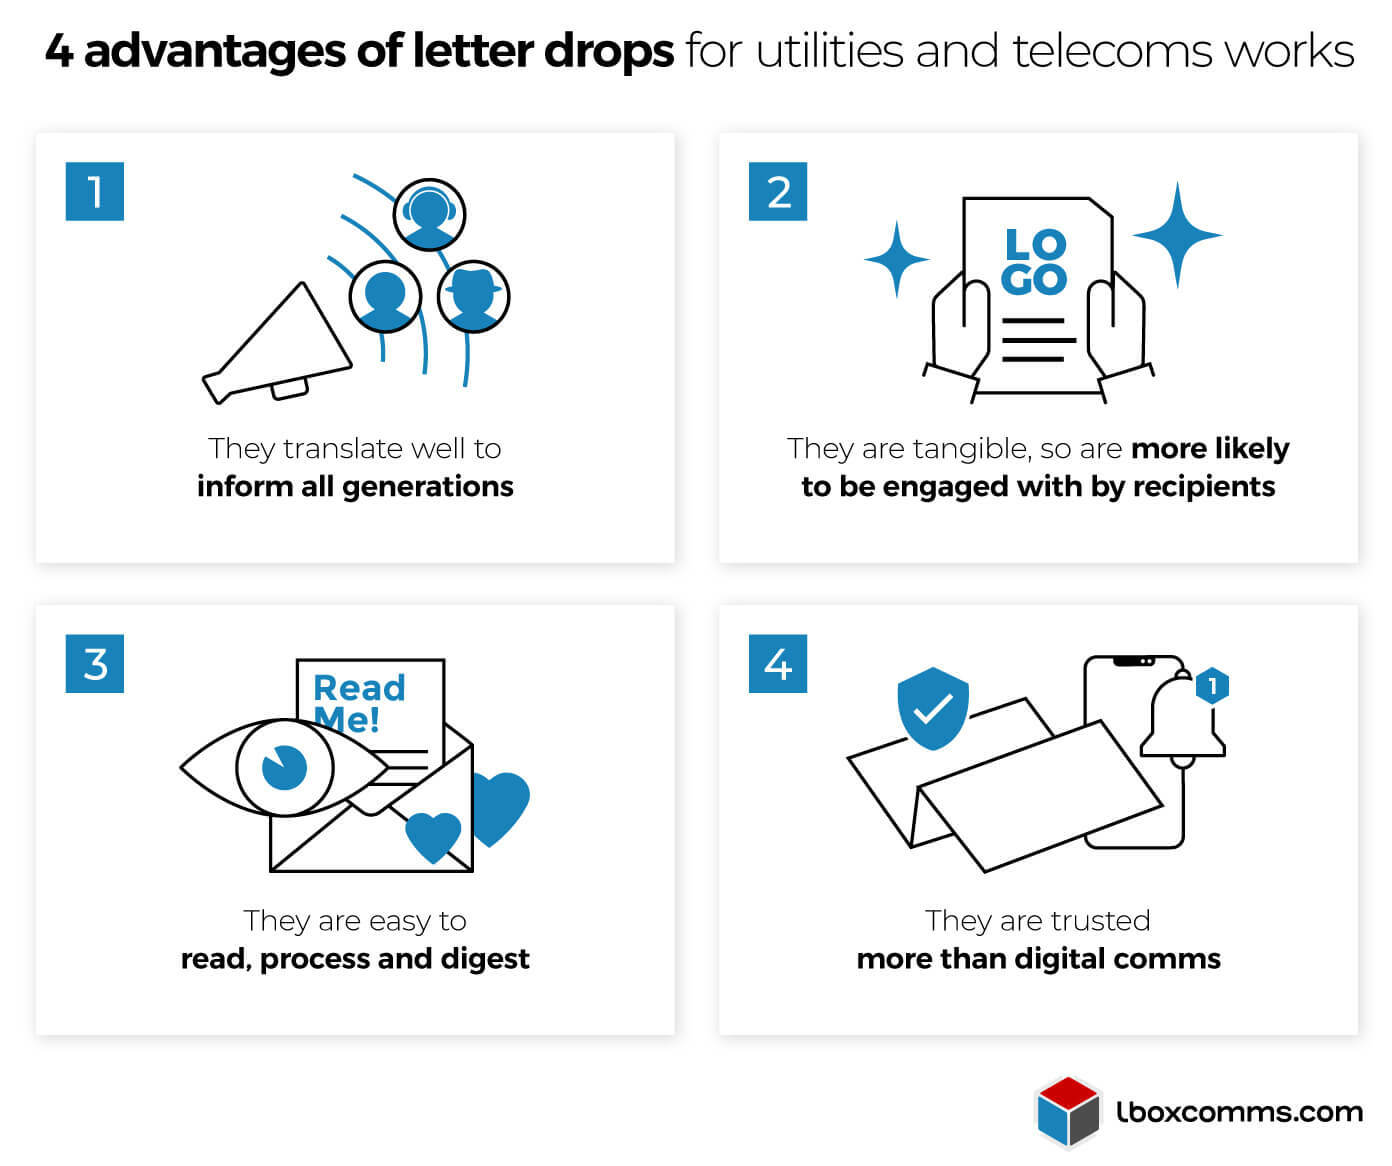 4 advantages of using letter drops for utilities and telecoms notifications - Infographic